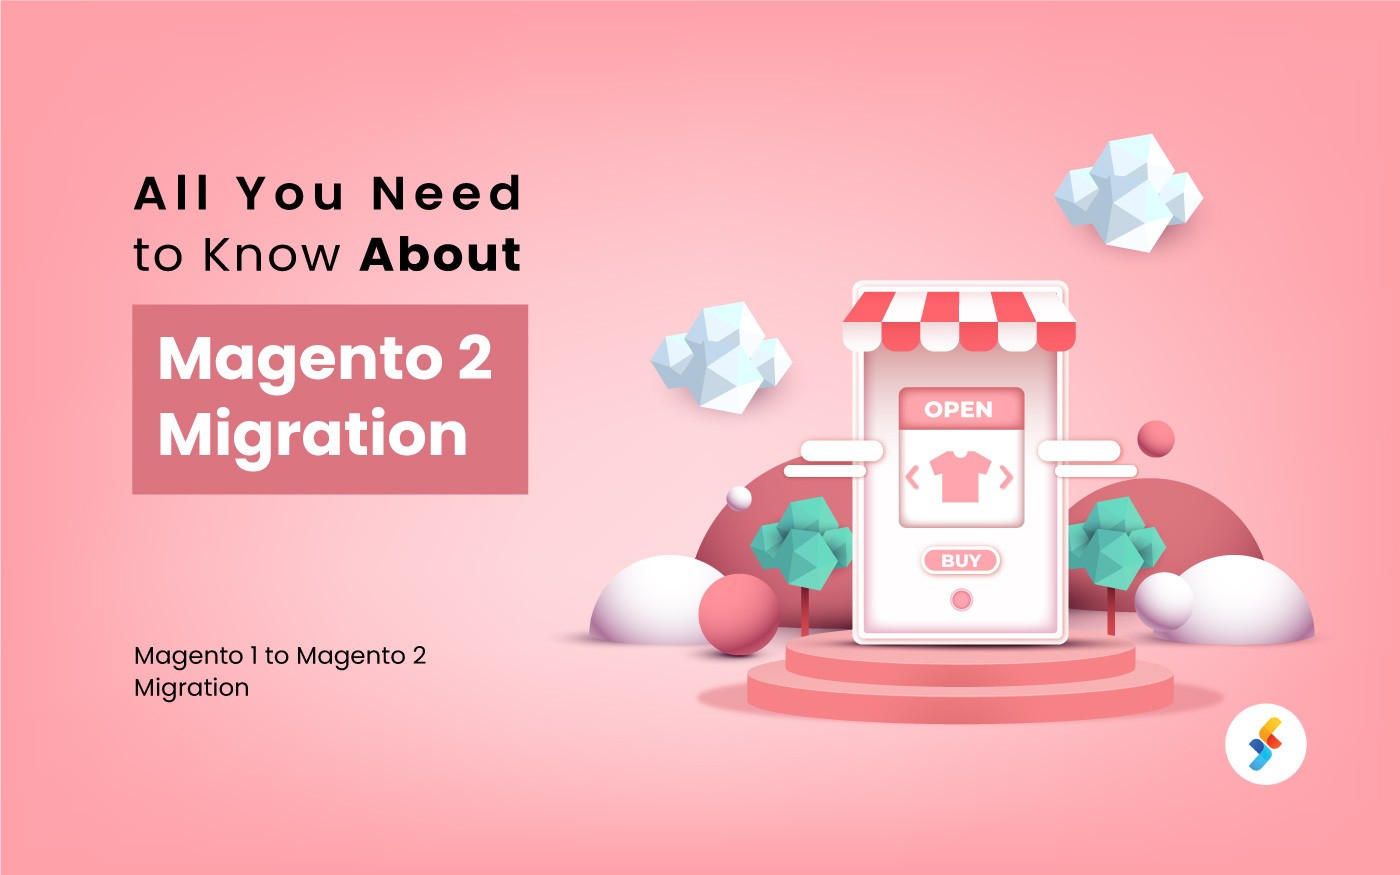 End of Magento 1’s Life – All You Need to Know About Magento 2 Migration